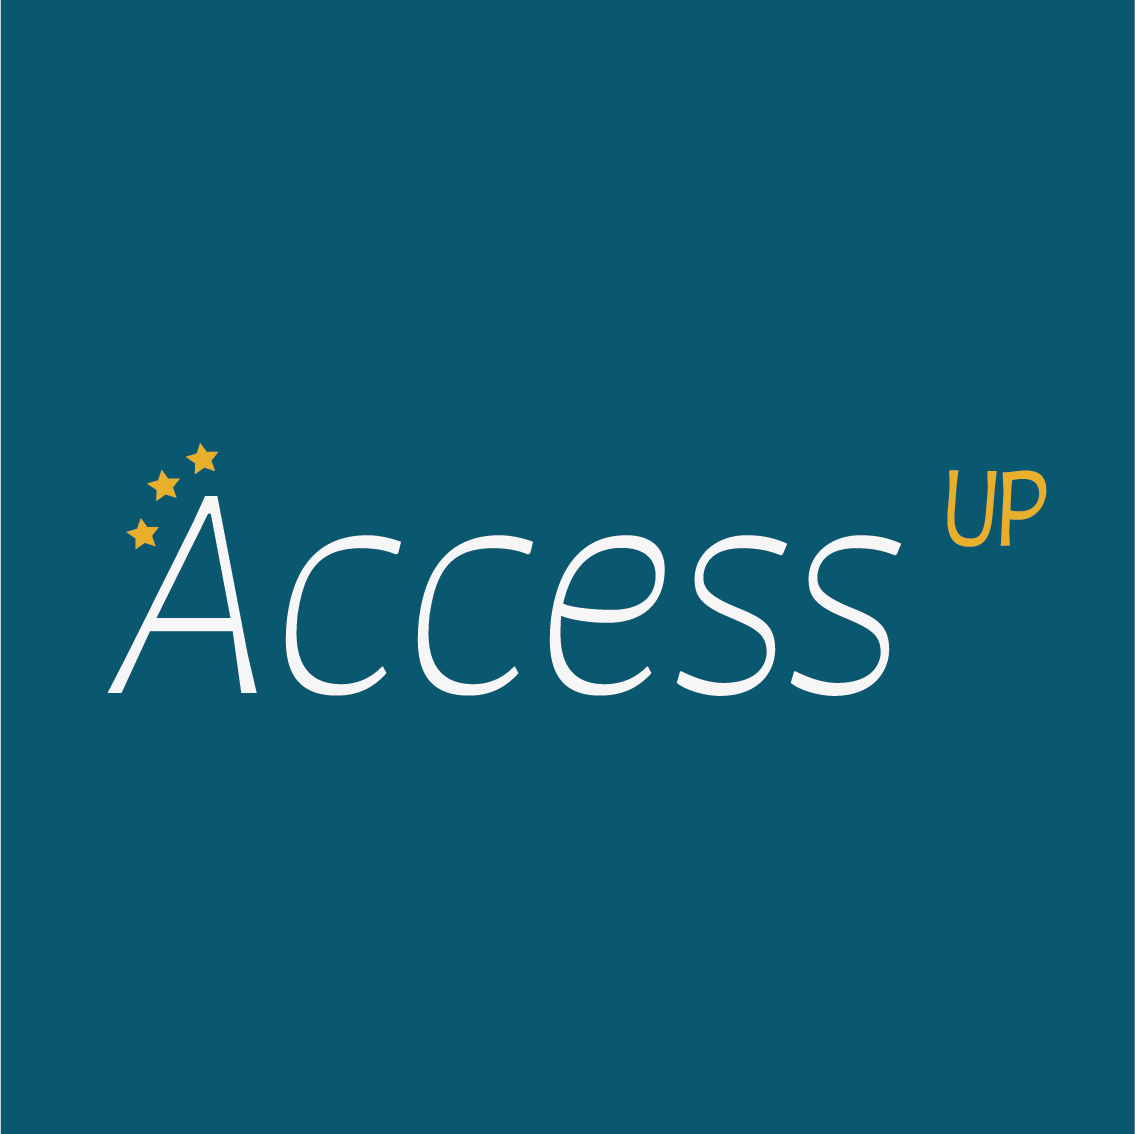 Access Up Quick Scan